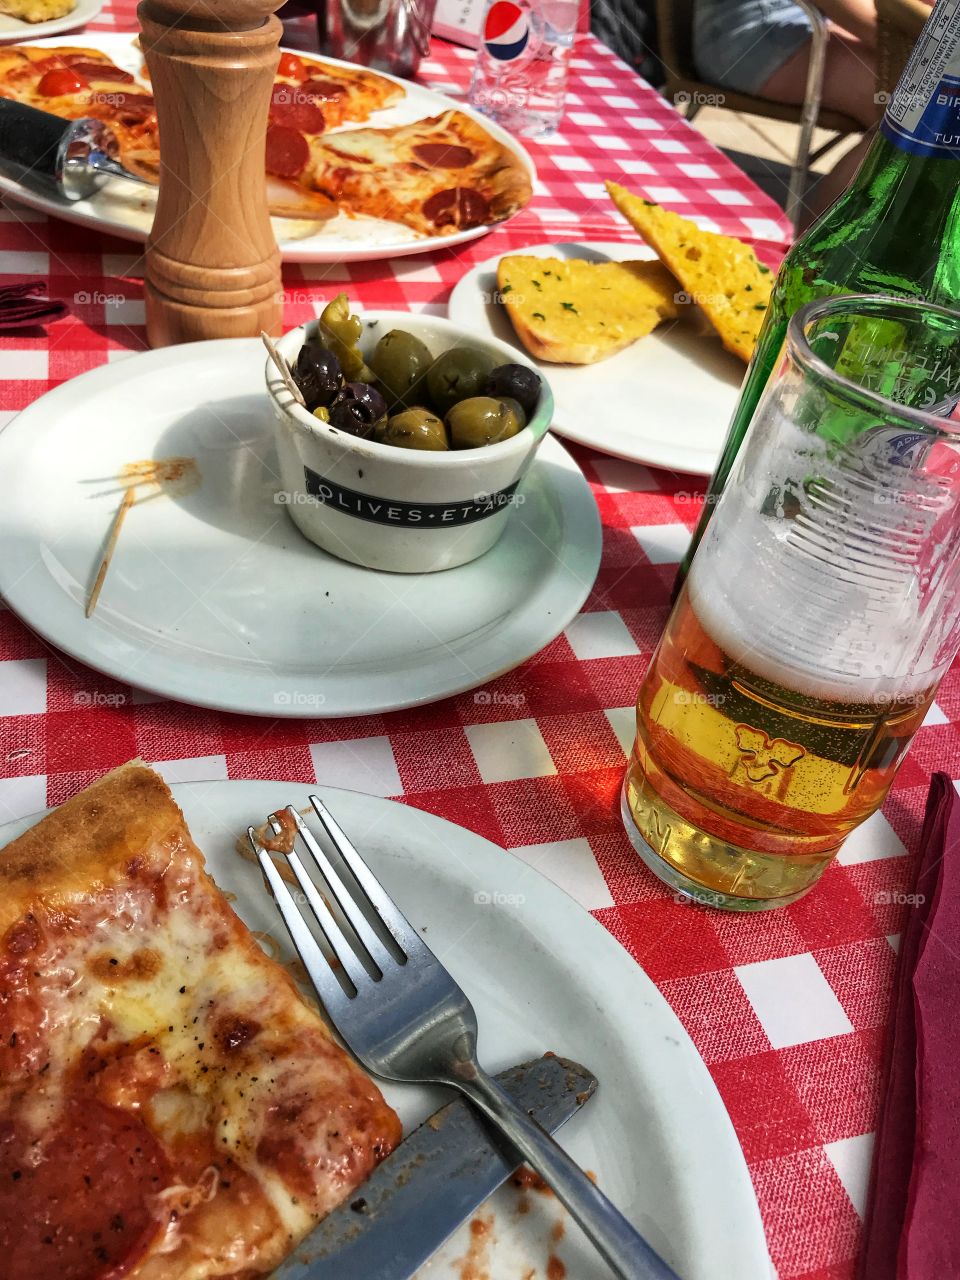 Pizza, olives and garlic bread. Of course with a beer.